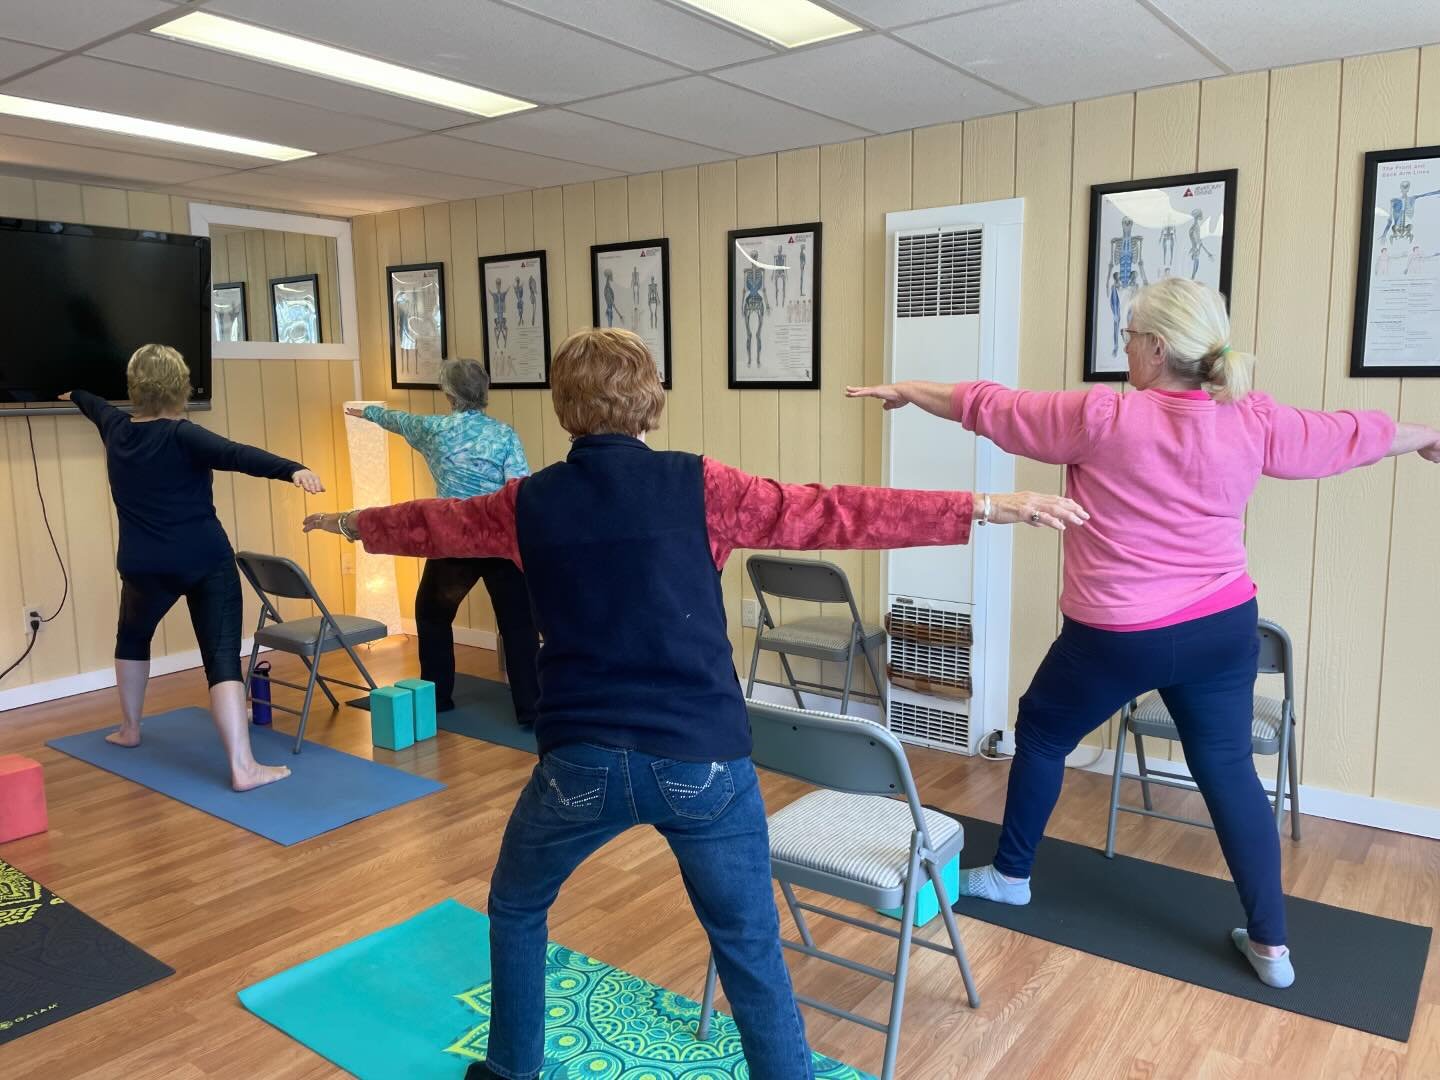 ANNOUNCING SPECIAL PRICING FOR OUR SENIOR YOGA CLASSES!

$15 drop in
$140 for 10 class card

Classes are held Monday &amp; Thursday 10:30 AM. 

To register email info@getflexyhonesdale.com.